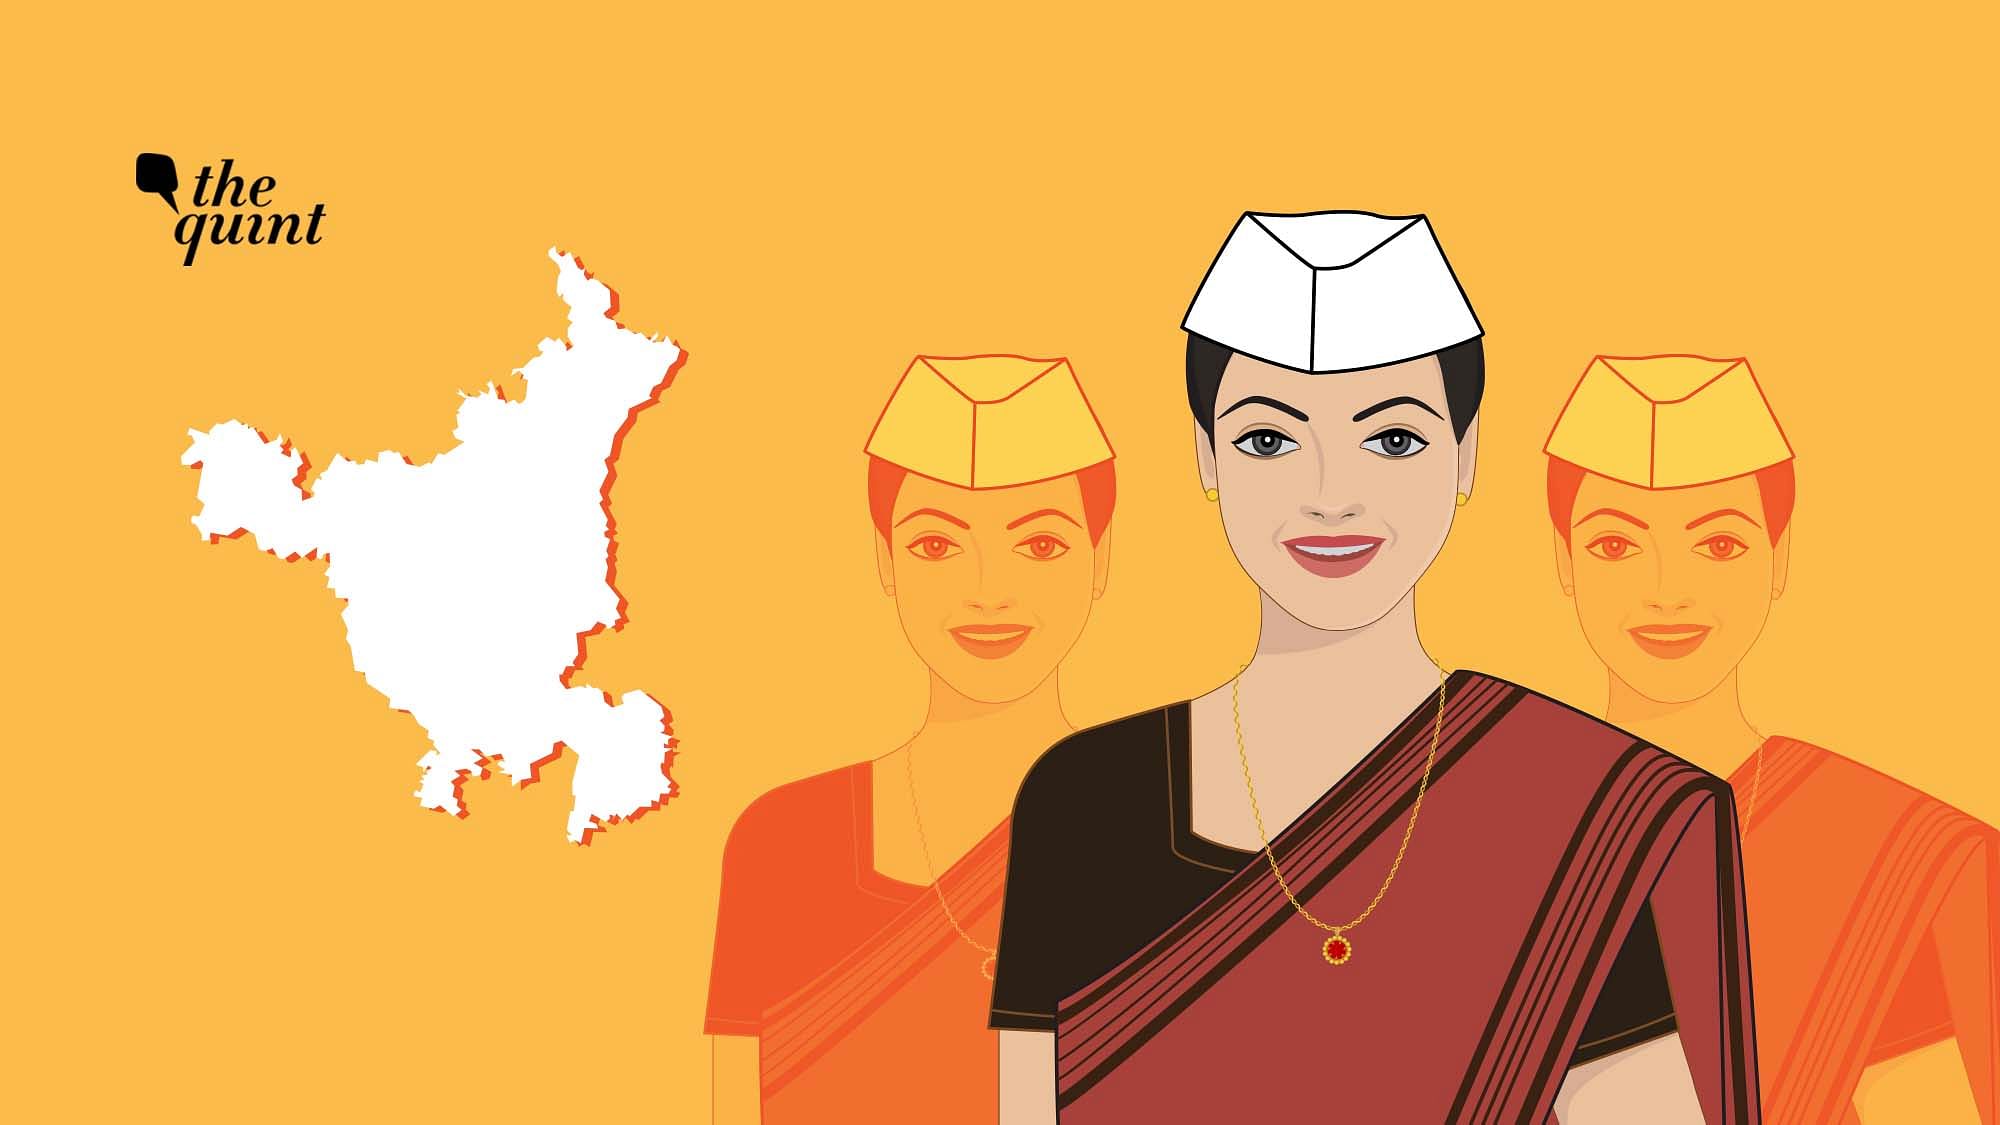  The state saw 104 women candidates contesting from 56 constituencies.